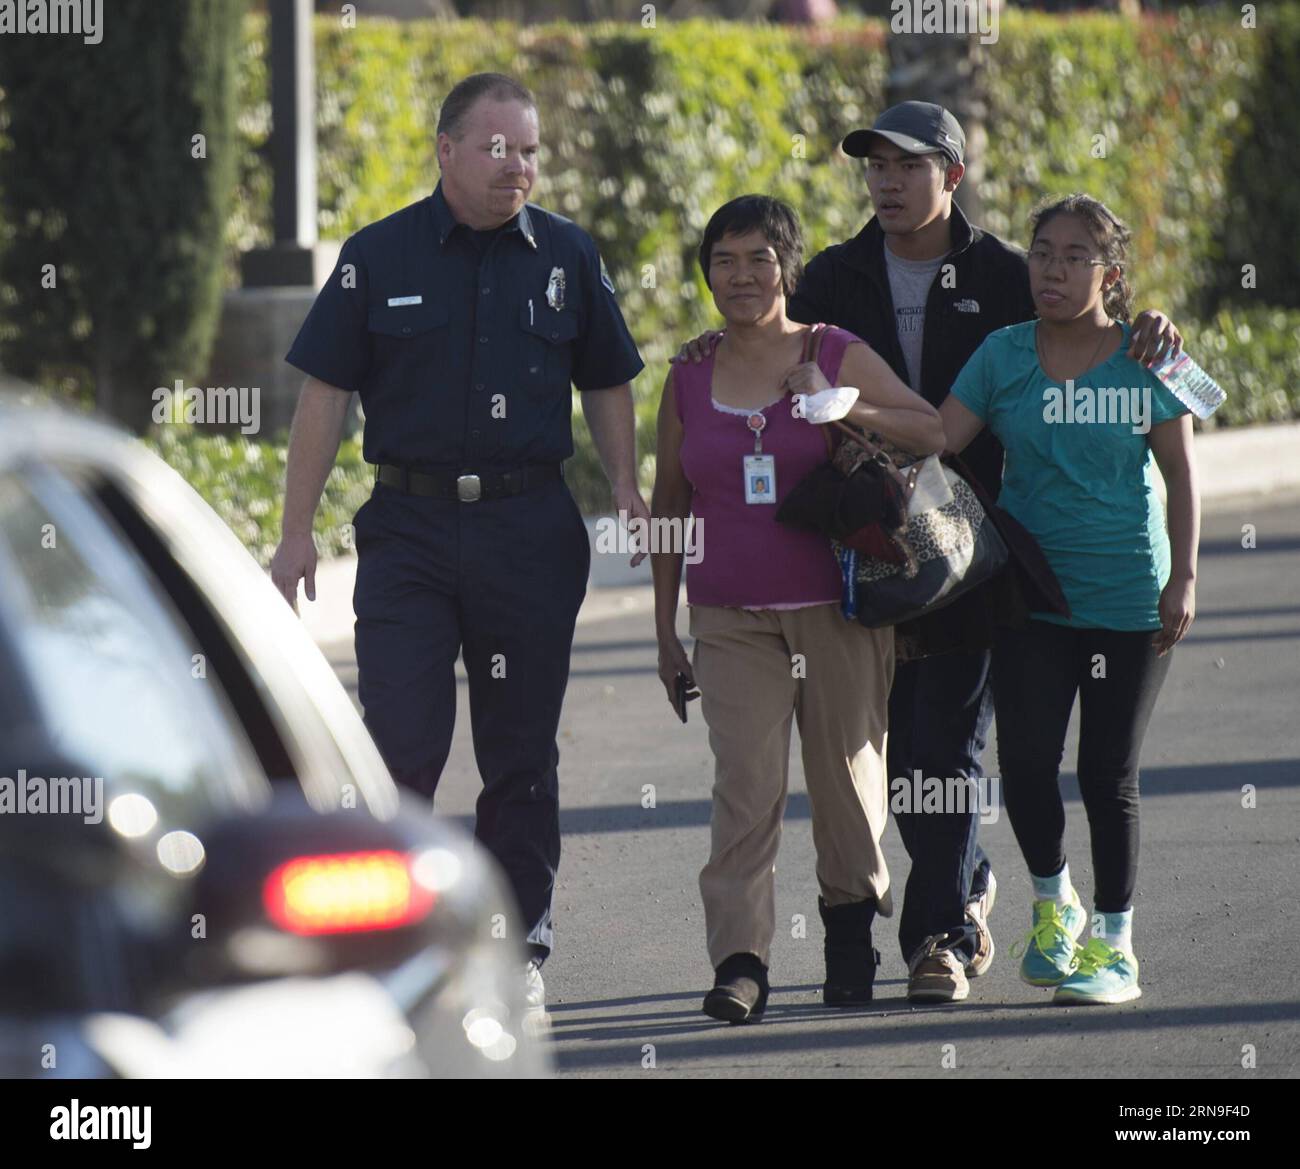 (151203) -- LOS ANGELES, Dec. 3, 2015 -- A survivor (2nd L) of the mass shooting at the Inland Regional Center meets her family after police questioning in San Bernardino City of Southern California, the United States, Dec. 2, 2015. One suspect was gunned down and one in custody Wednesday afternoon after a shooting killed at least 14 people and injured 14 others in San Bernardino, local media reported. ) (zw) U.S.-SAN BERNARDINO-SHOOTING YangxLei PUBLICATIONxNOTxINxCHN   Los Angeles DEC 3 2015 a Survivor 2nd l of The Mass Shooting AT The Domestically Regional Center Meets her Family After Poli Stock Photo